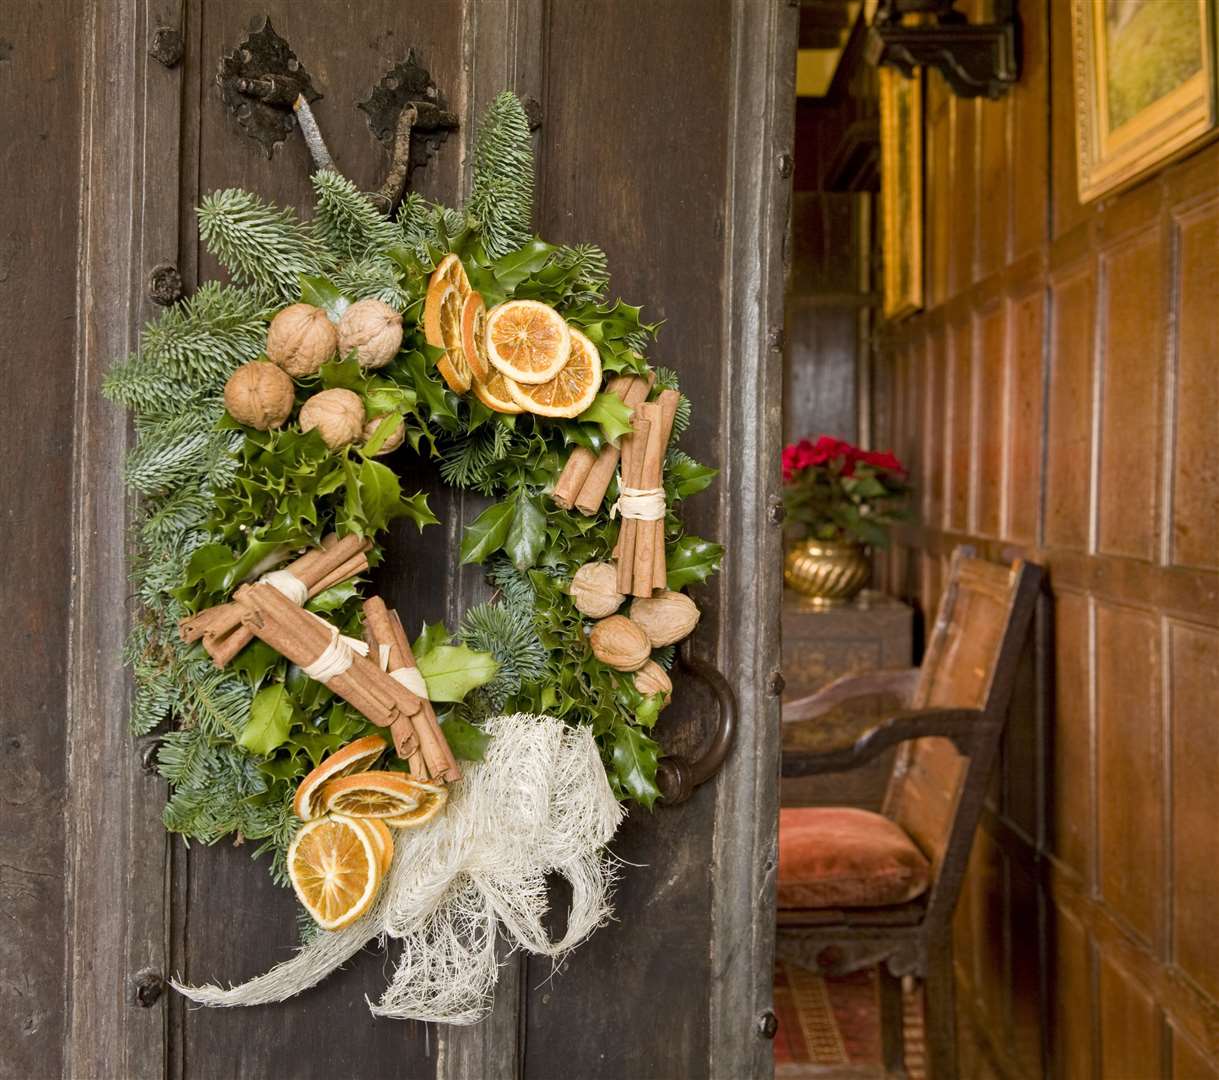 Traditional Christmas wreaths and garlands had been torn down